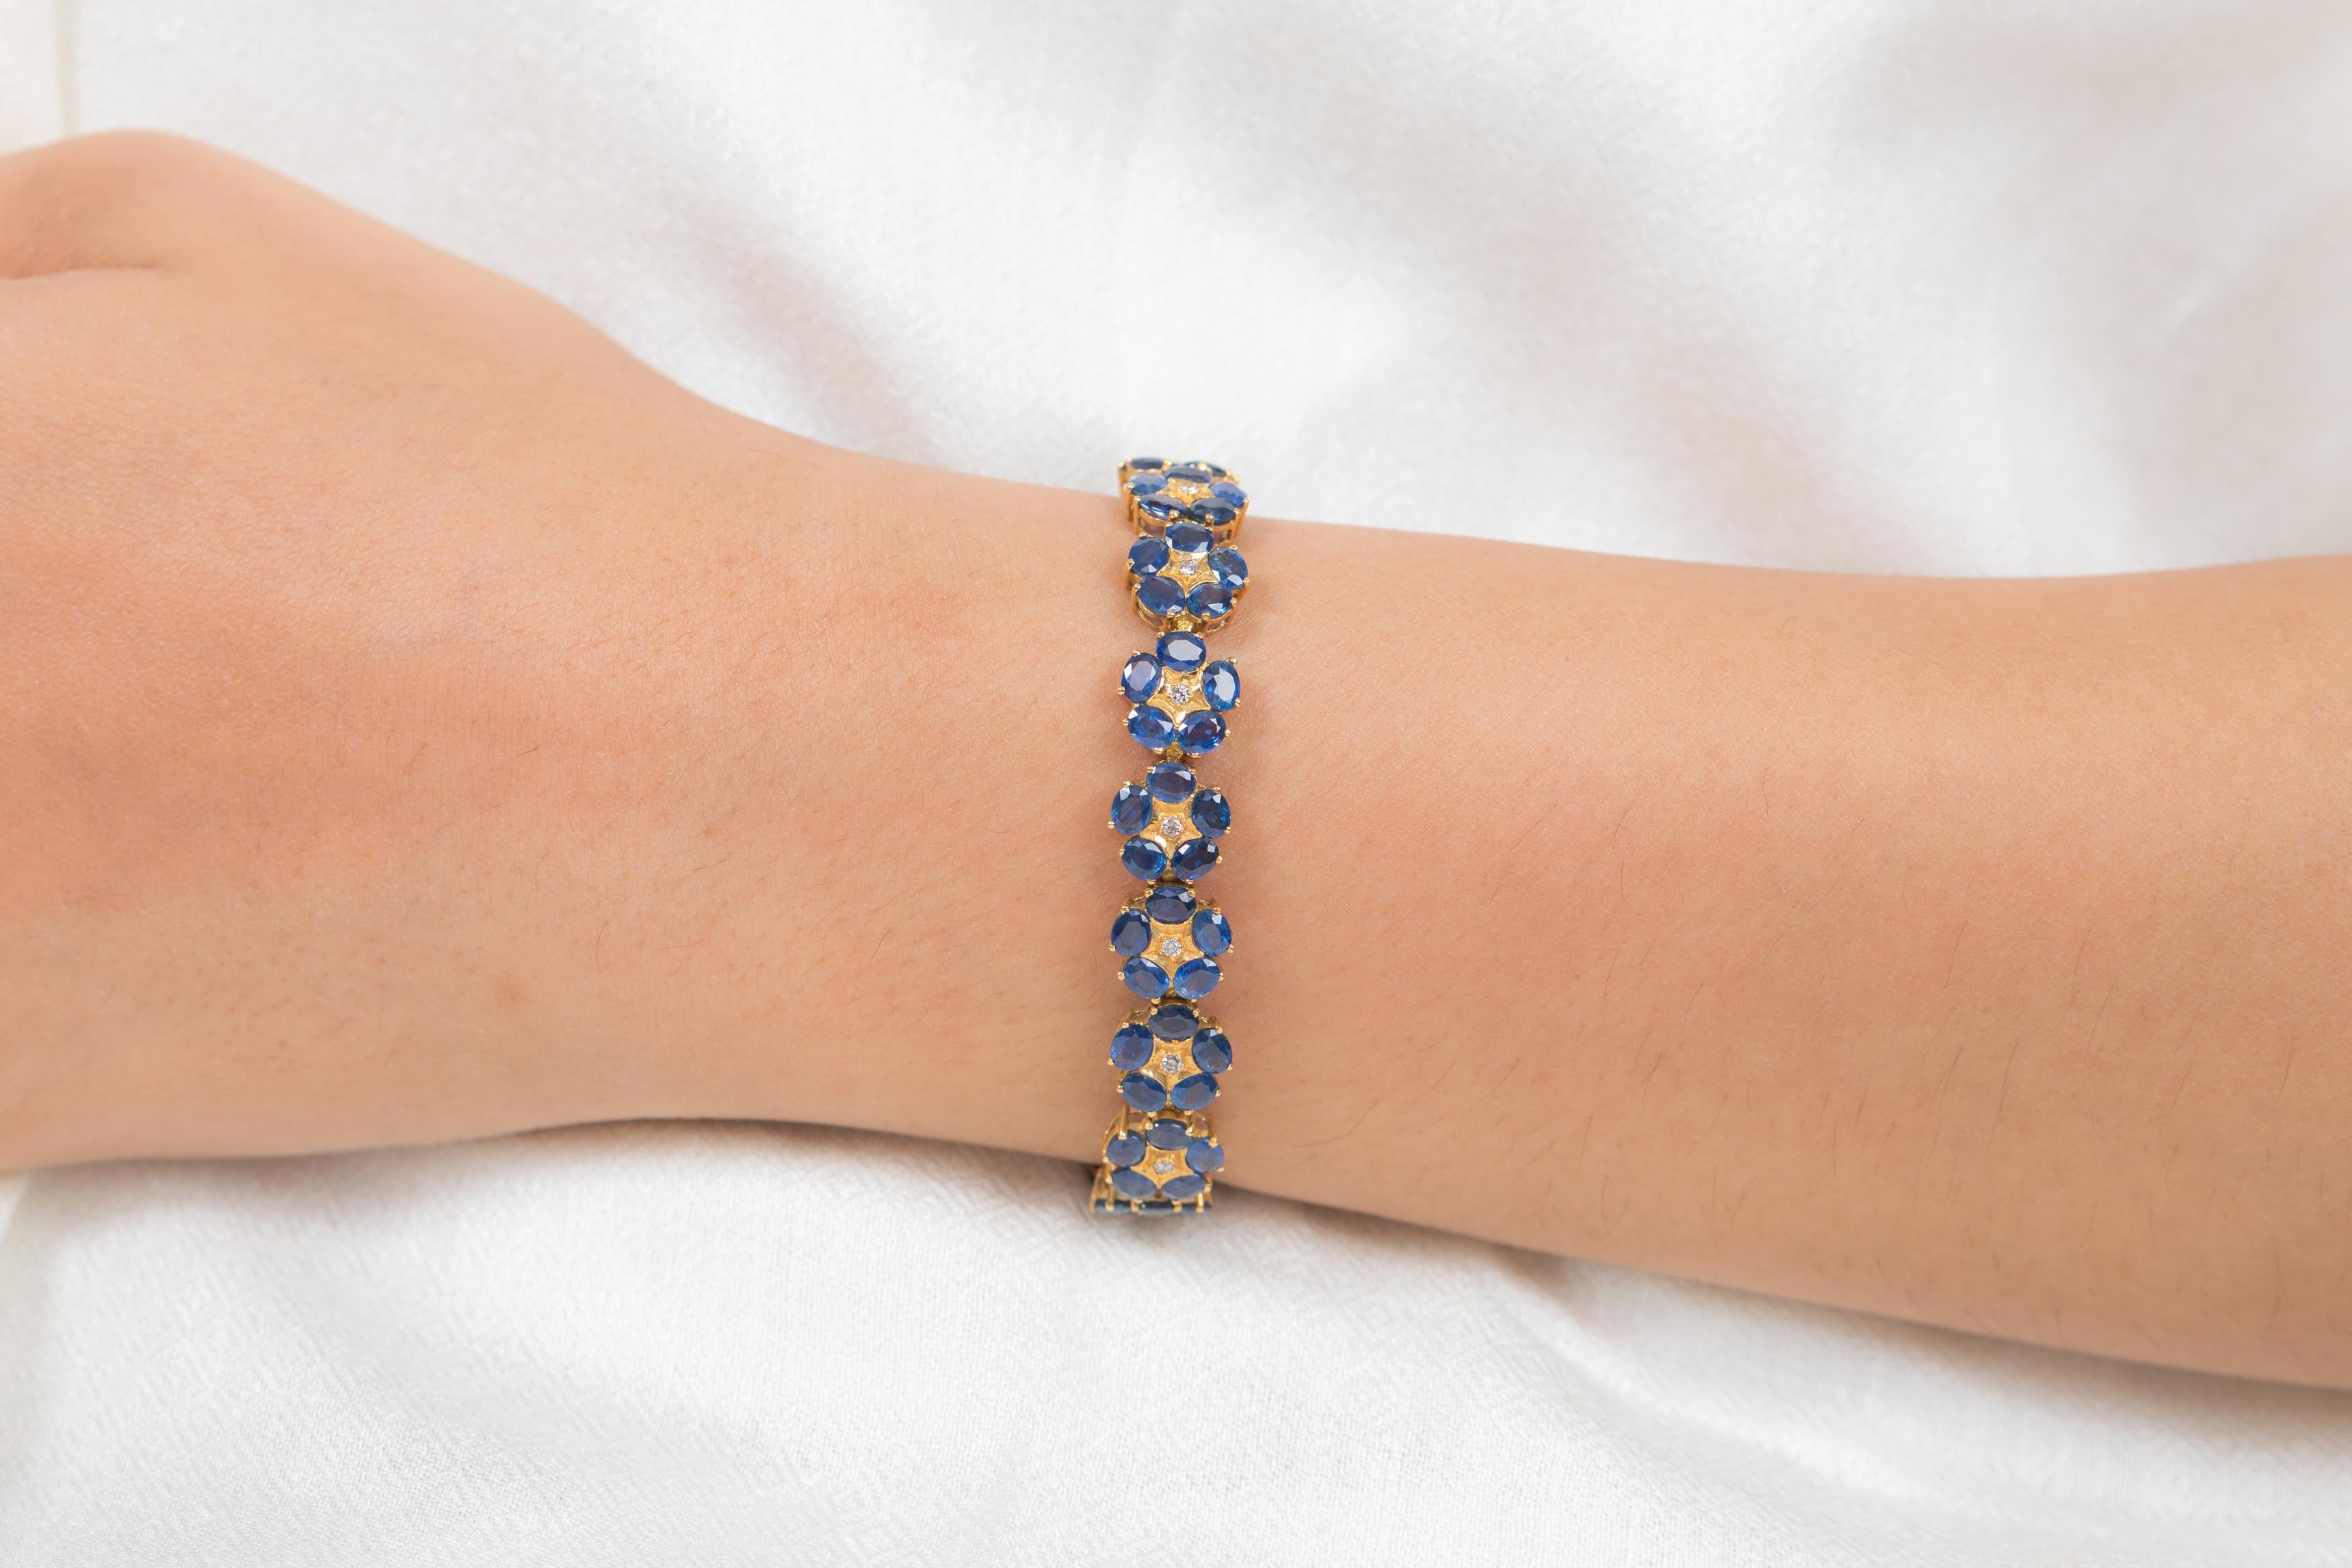 The wearing of charms may have begun as a form of amulet or talisman to ward off evil spirits or bad luck.
This blue sapphire bracelet has a oval cut gemstone arranged in floral shape with diamonds in center in 18K Gold. A perfect piece of jewelry